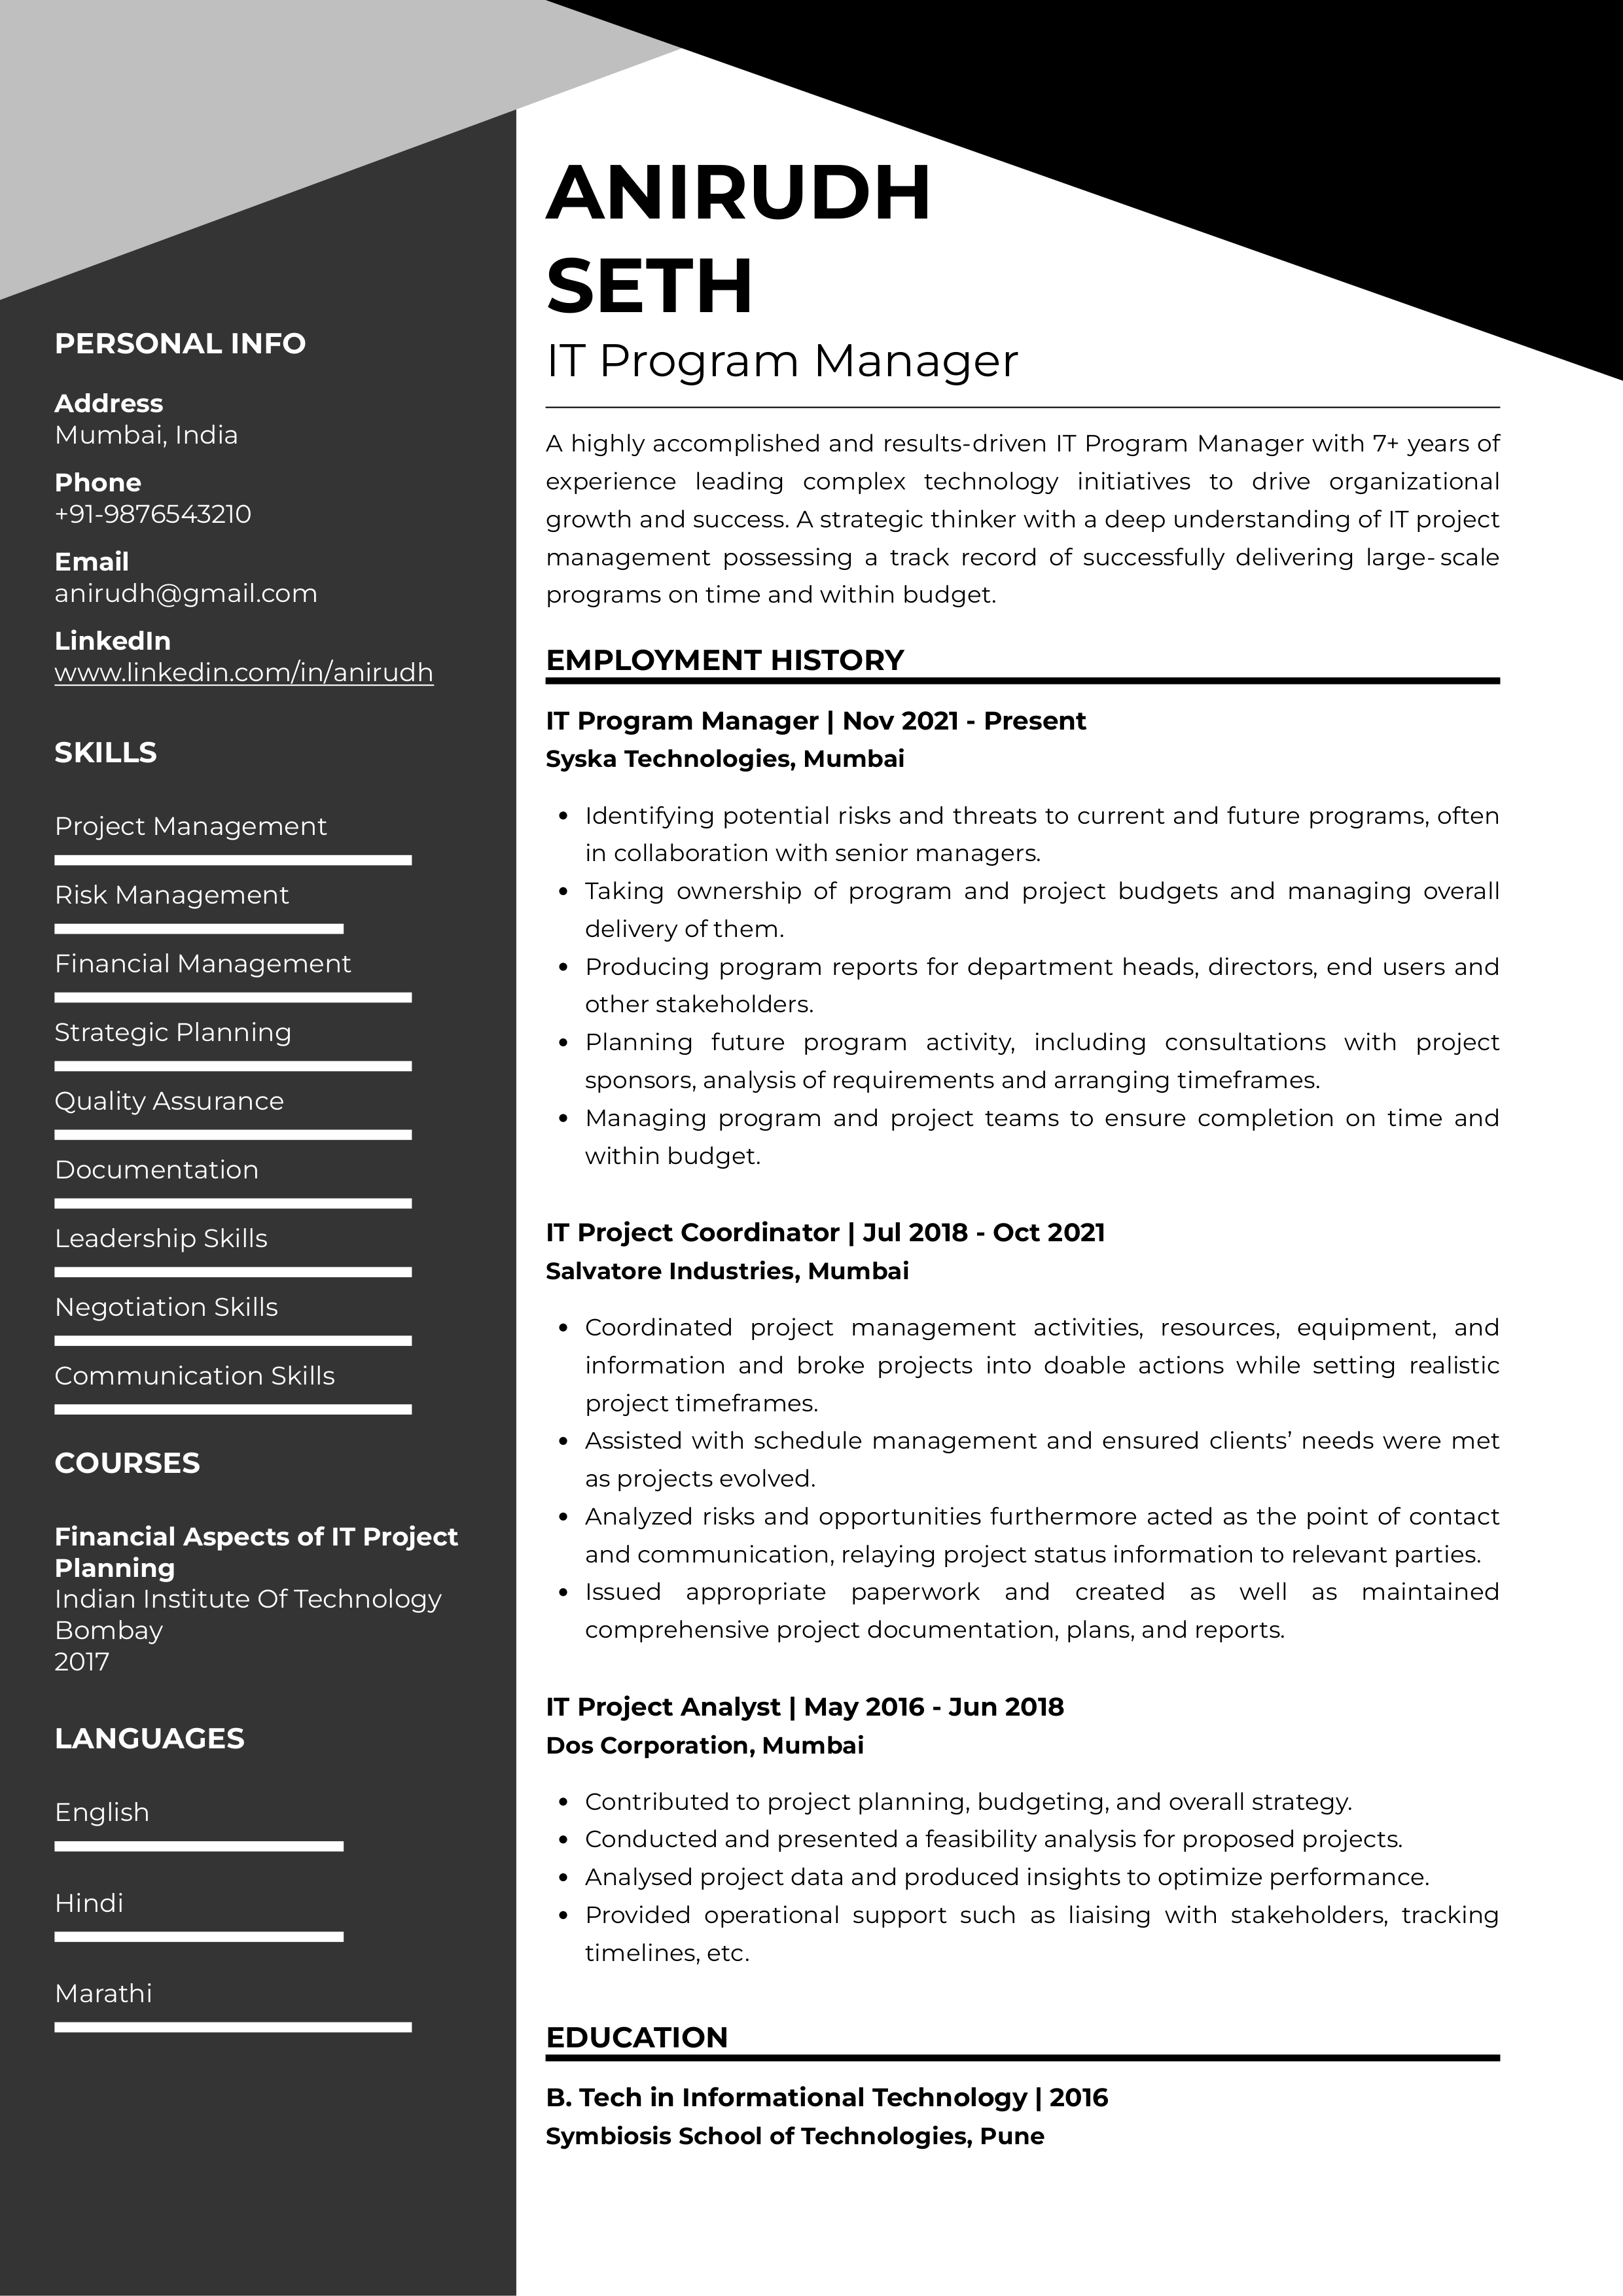 Sample Resume of IT Program Manager | Free Resume Templates & Samples on Resumod.co